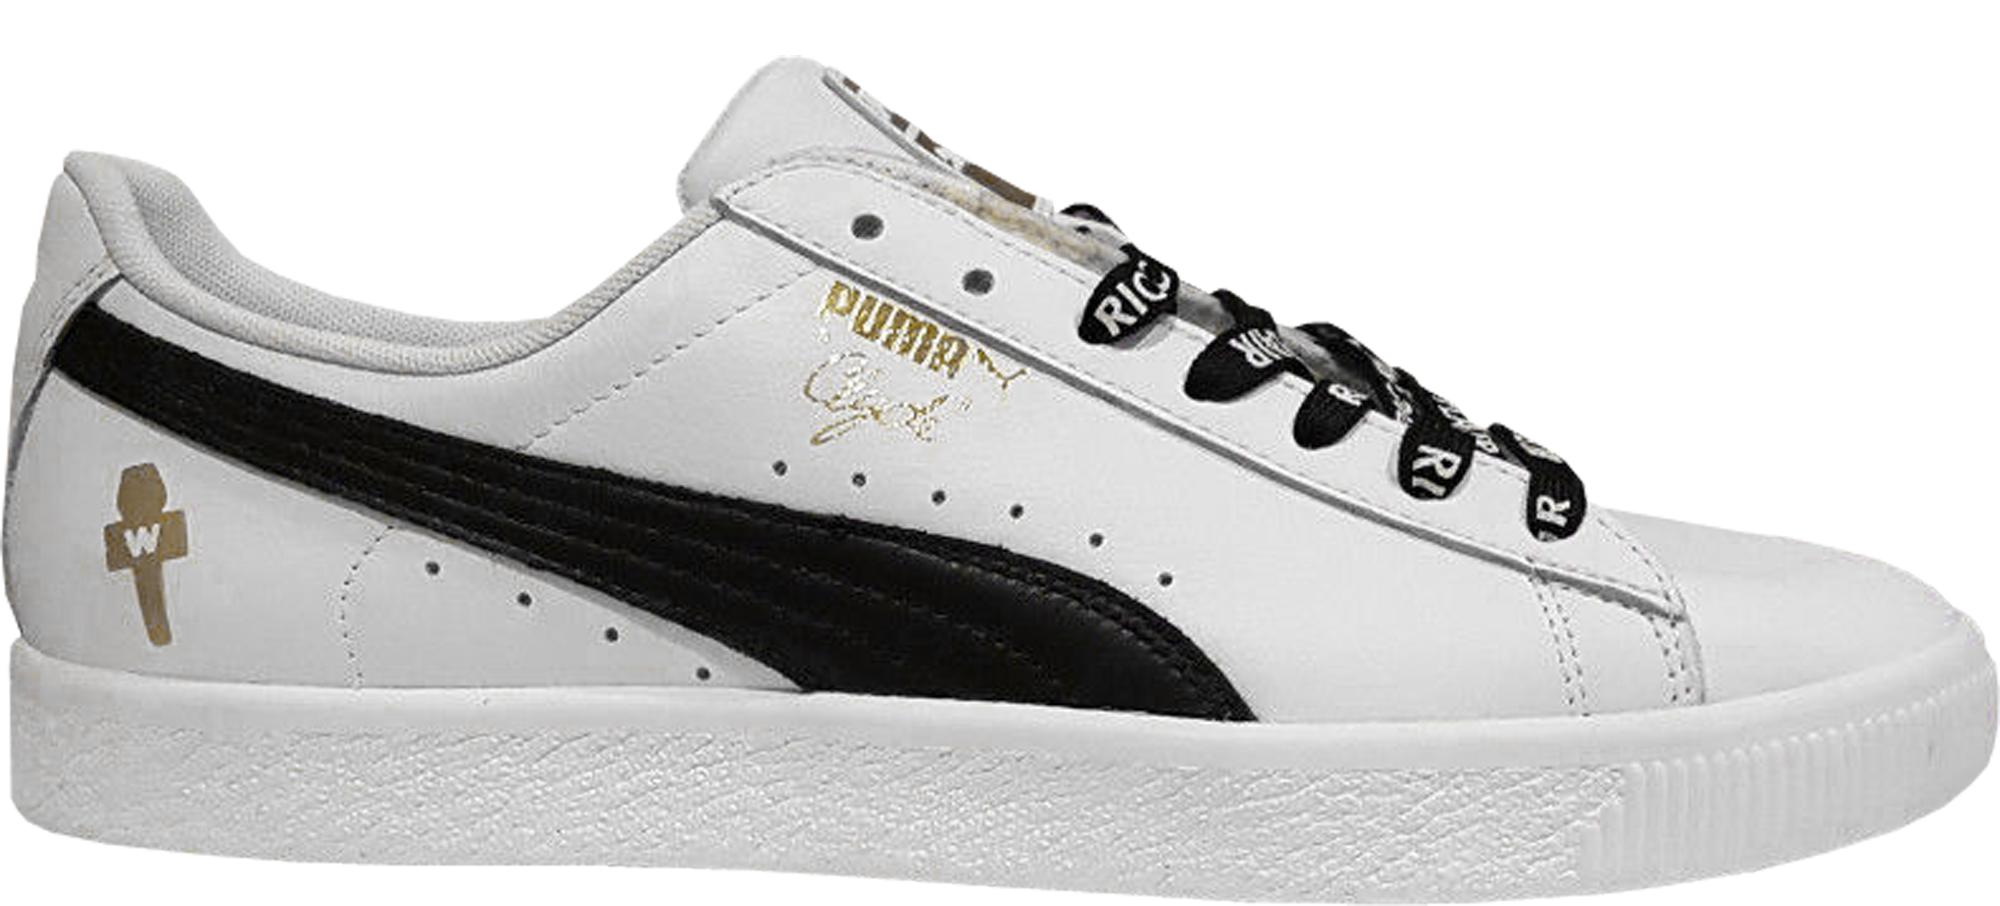 PUMA Clyde Wwe Ultimate Warrior in White/Gold-Black (White) for Men - Save  77% - Lyst